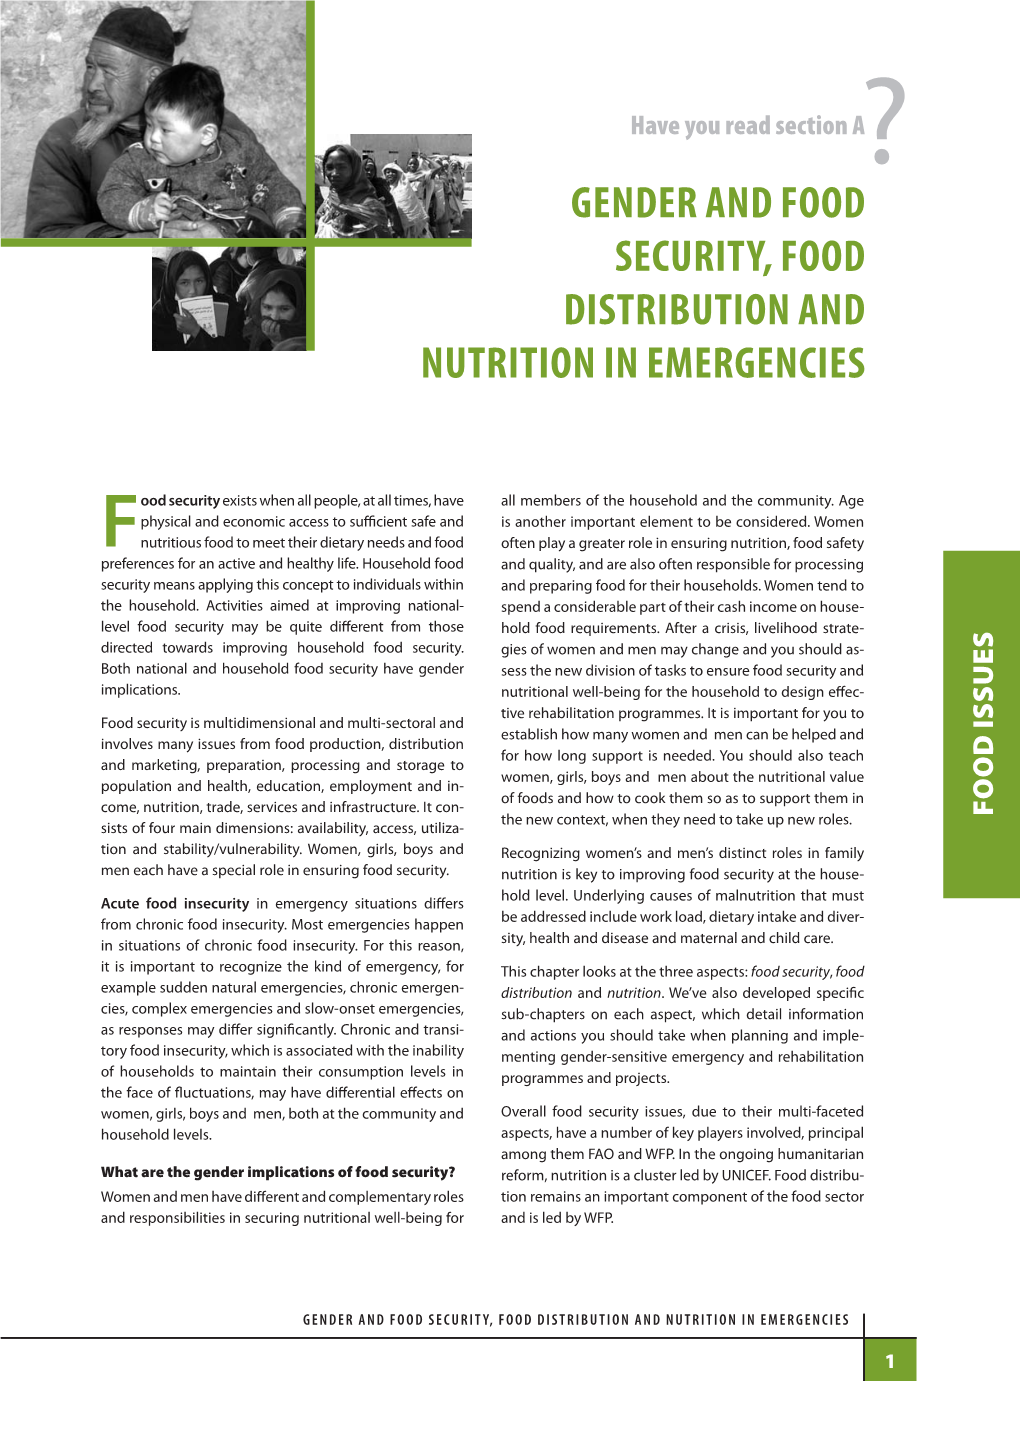 Gender and Food Security, Food Distribution and Nutrition in Emergencies